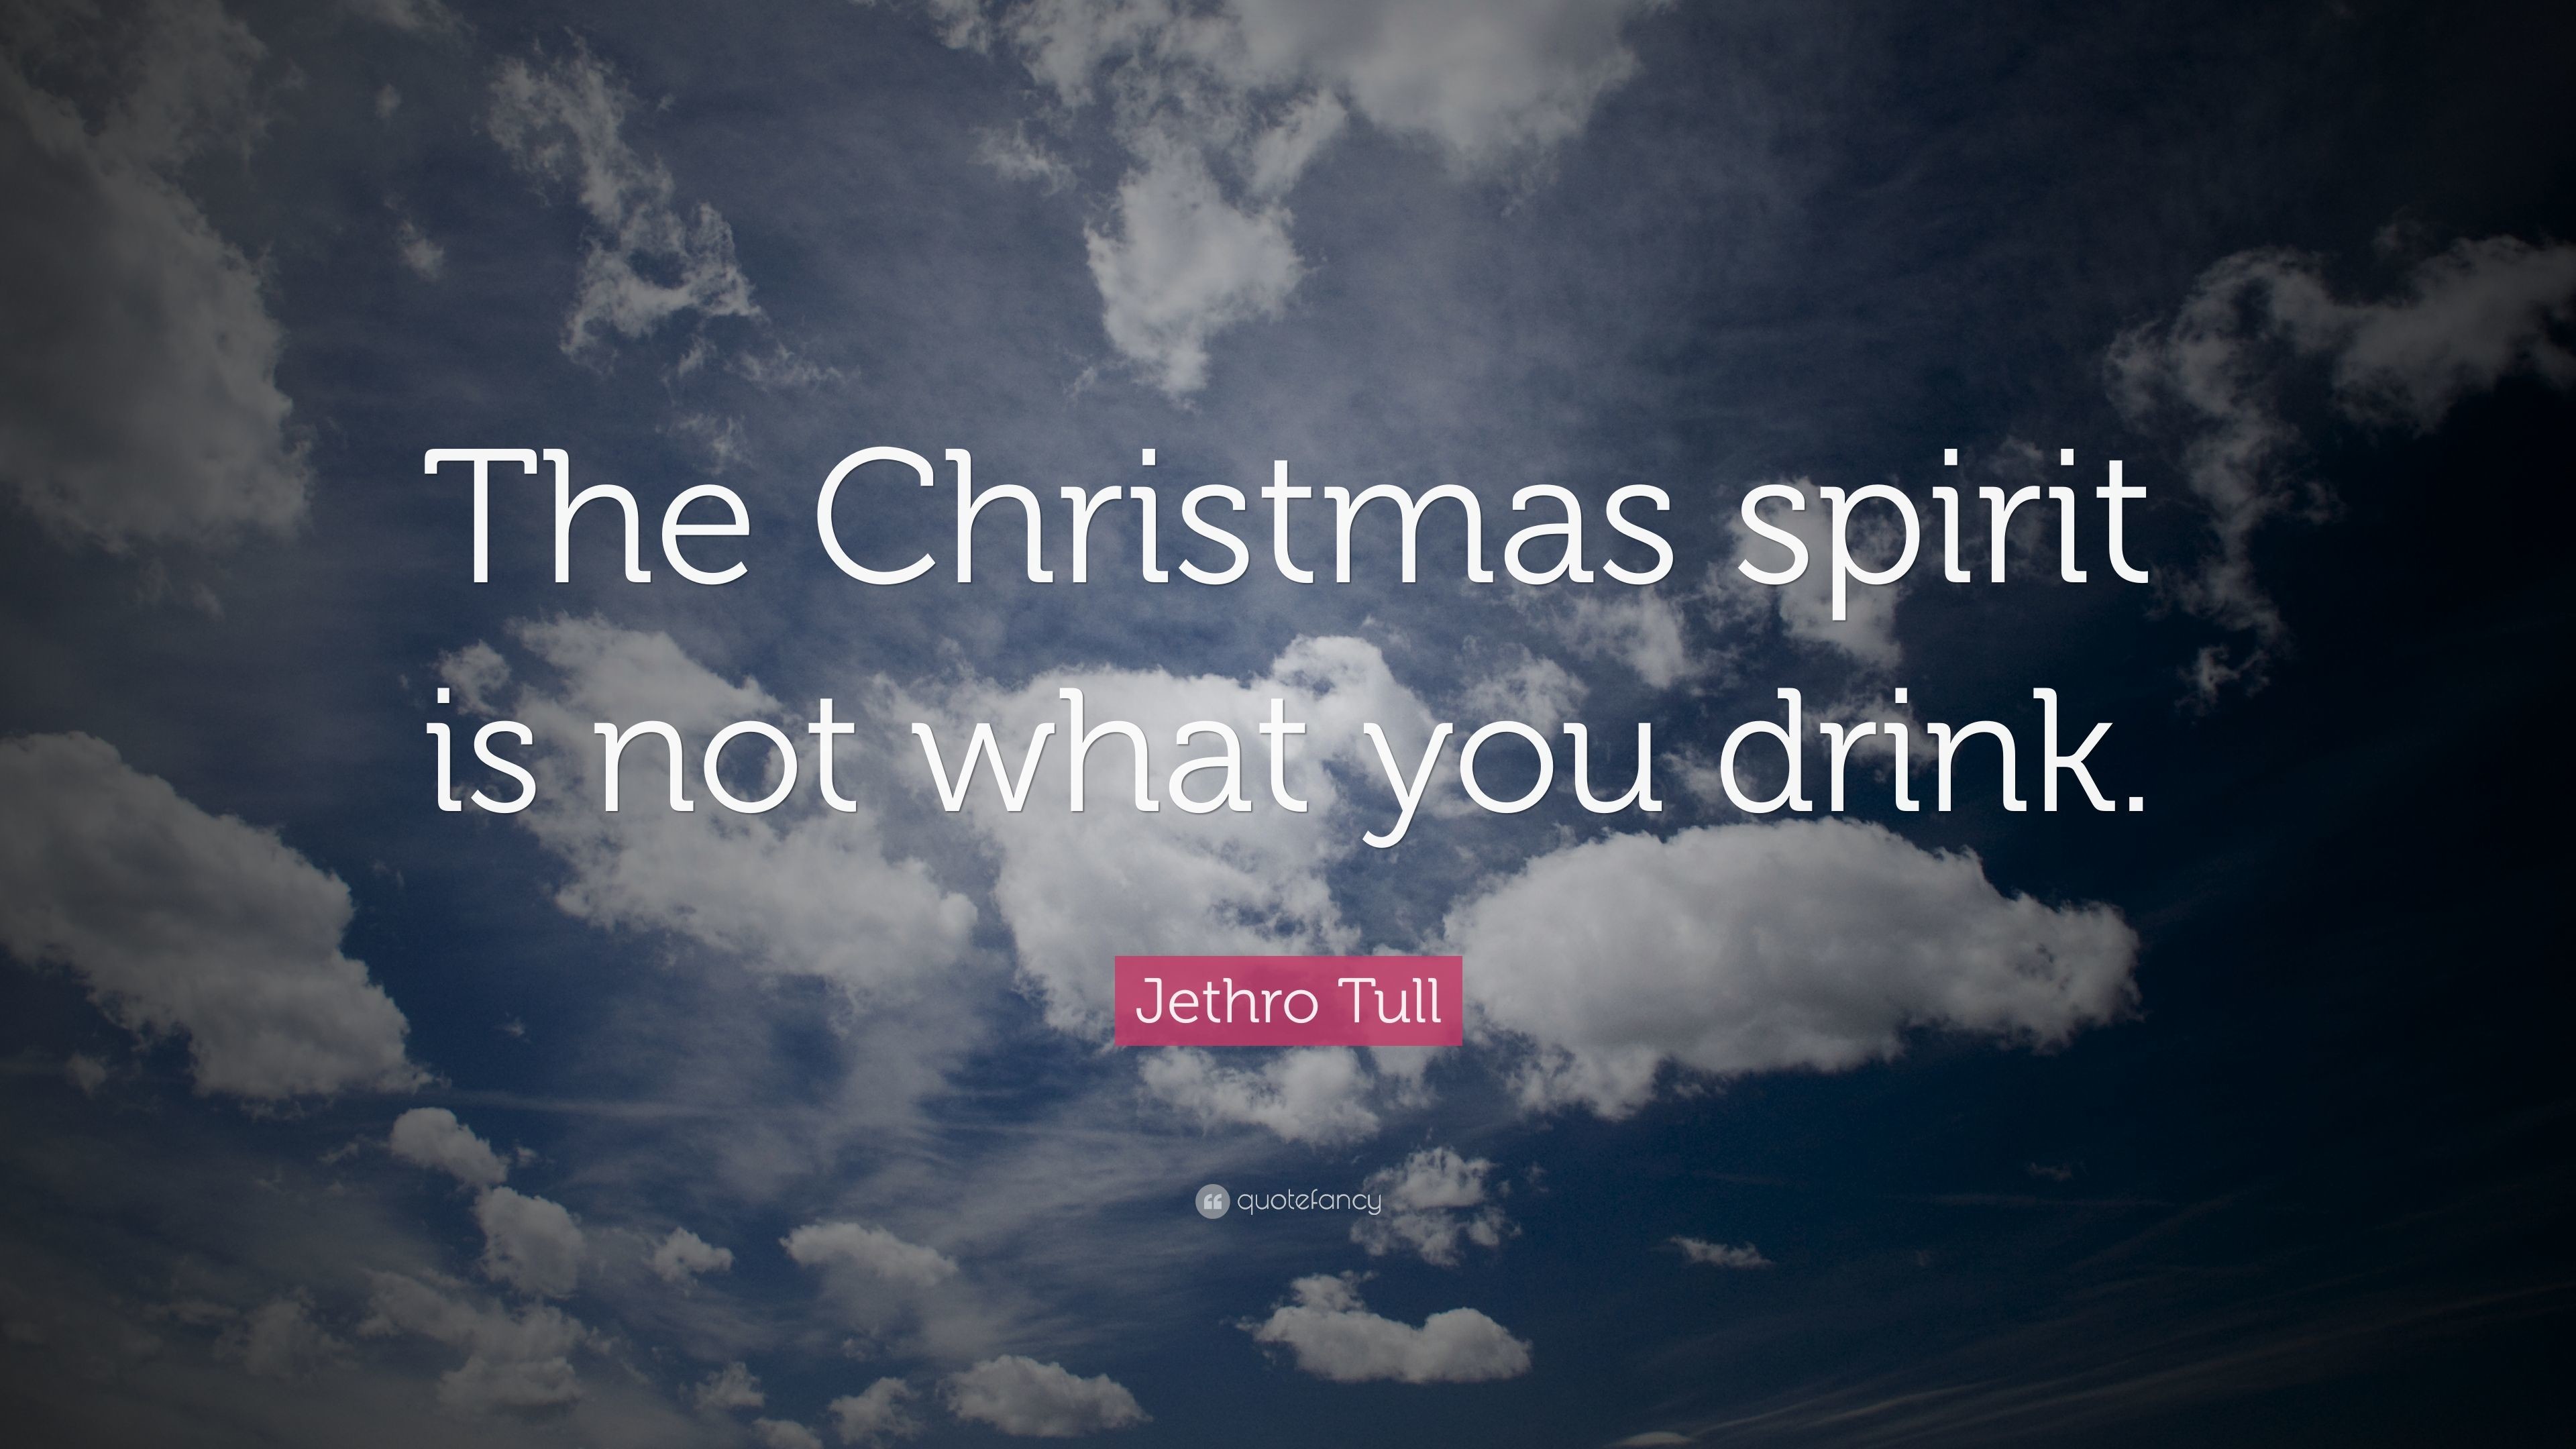 3840x2160 Jethro Tull Quote: “The Christmas spirit is not what you drink.”